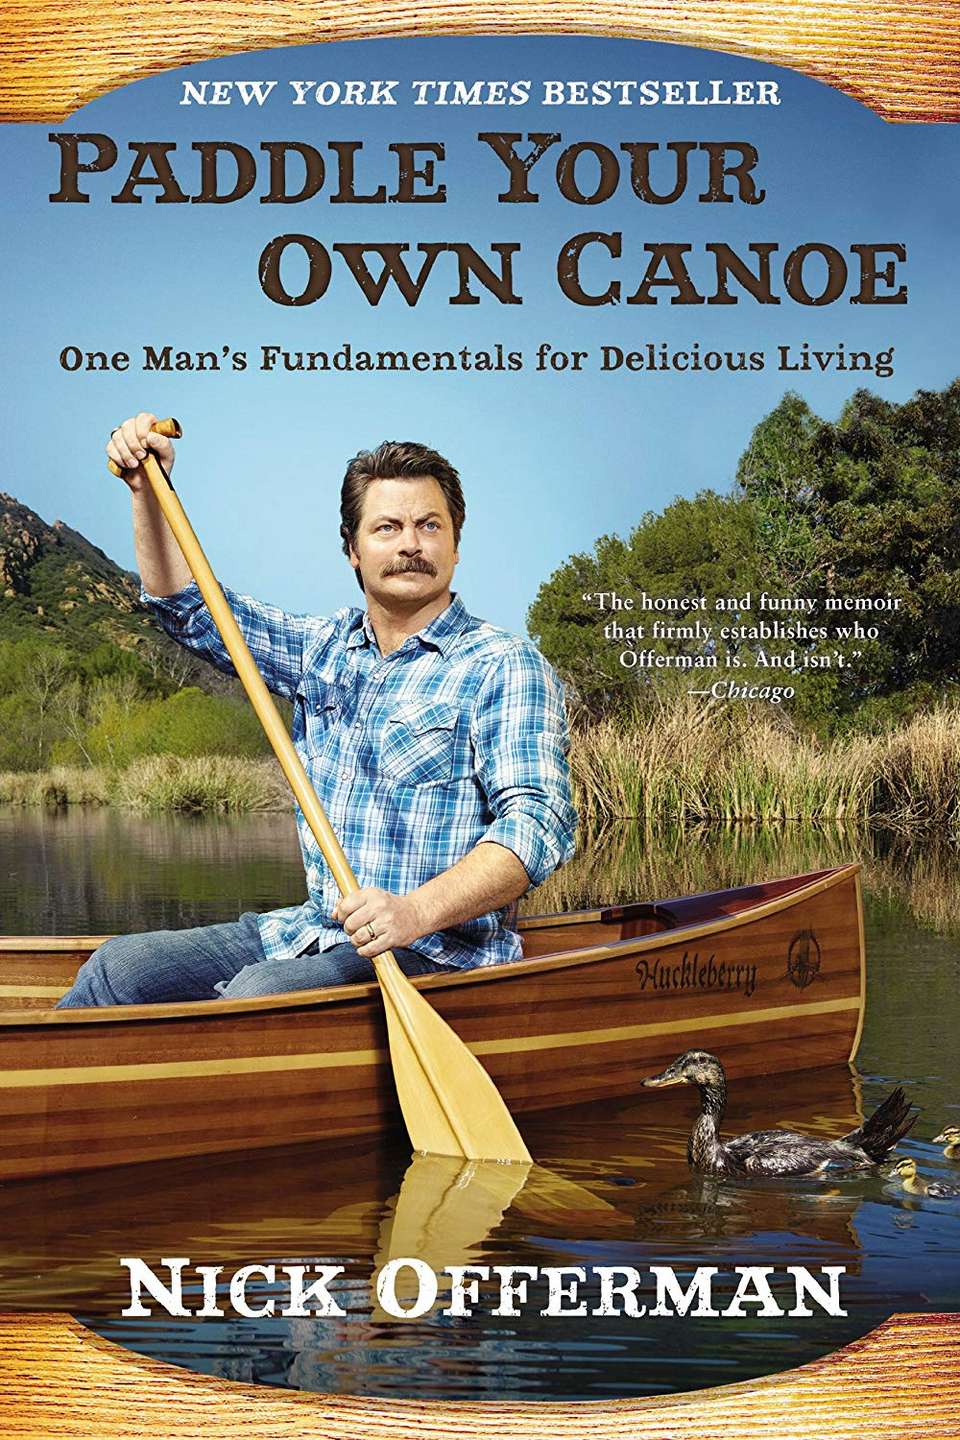 Book cover of Paddle Your Own Canoe featuring Nick Offerman paddling a wooden canoe.